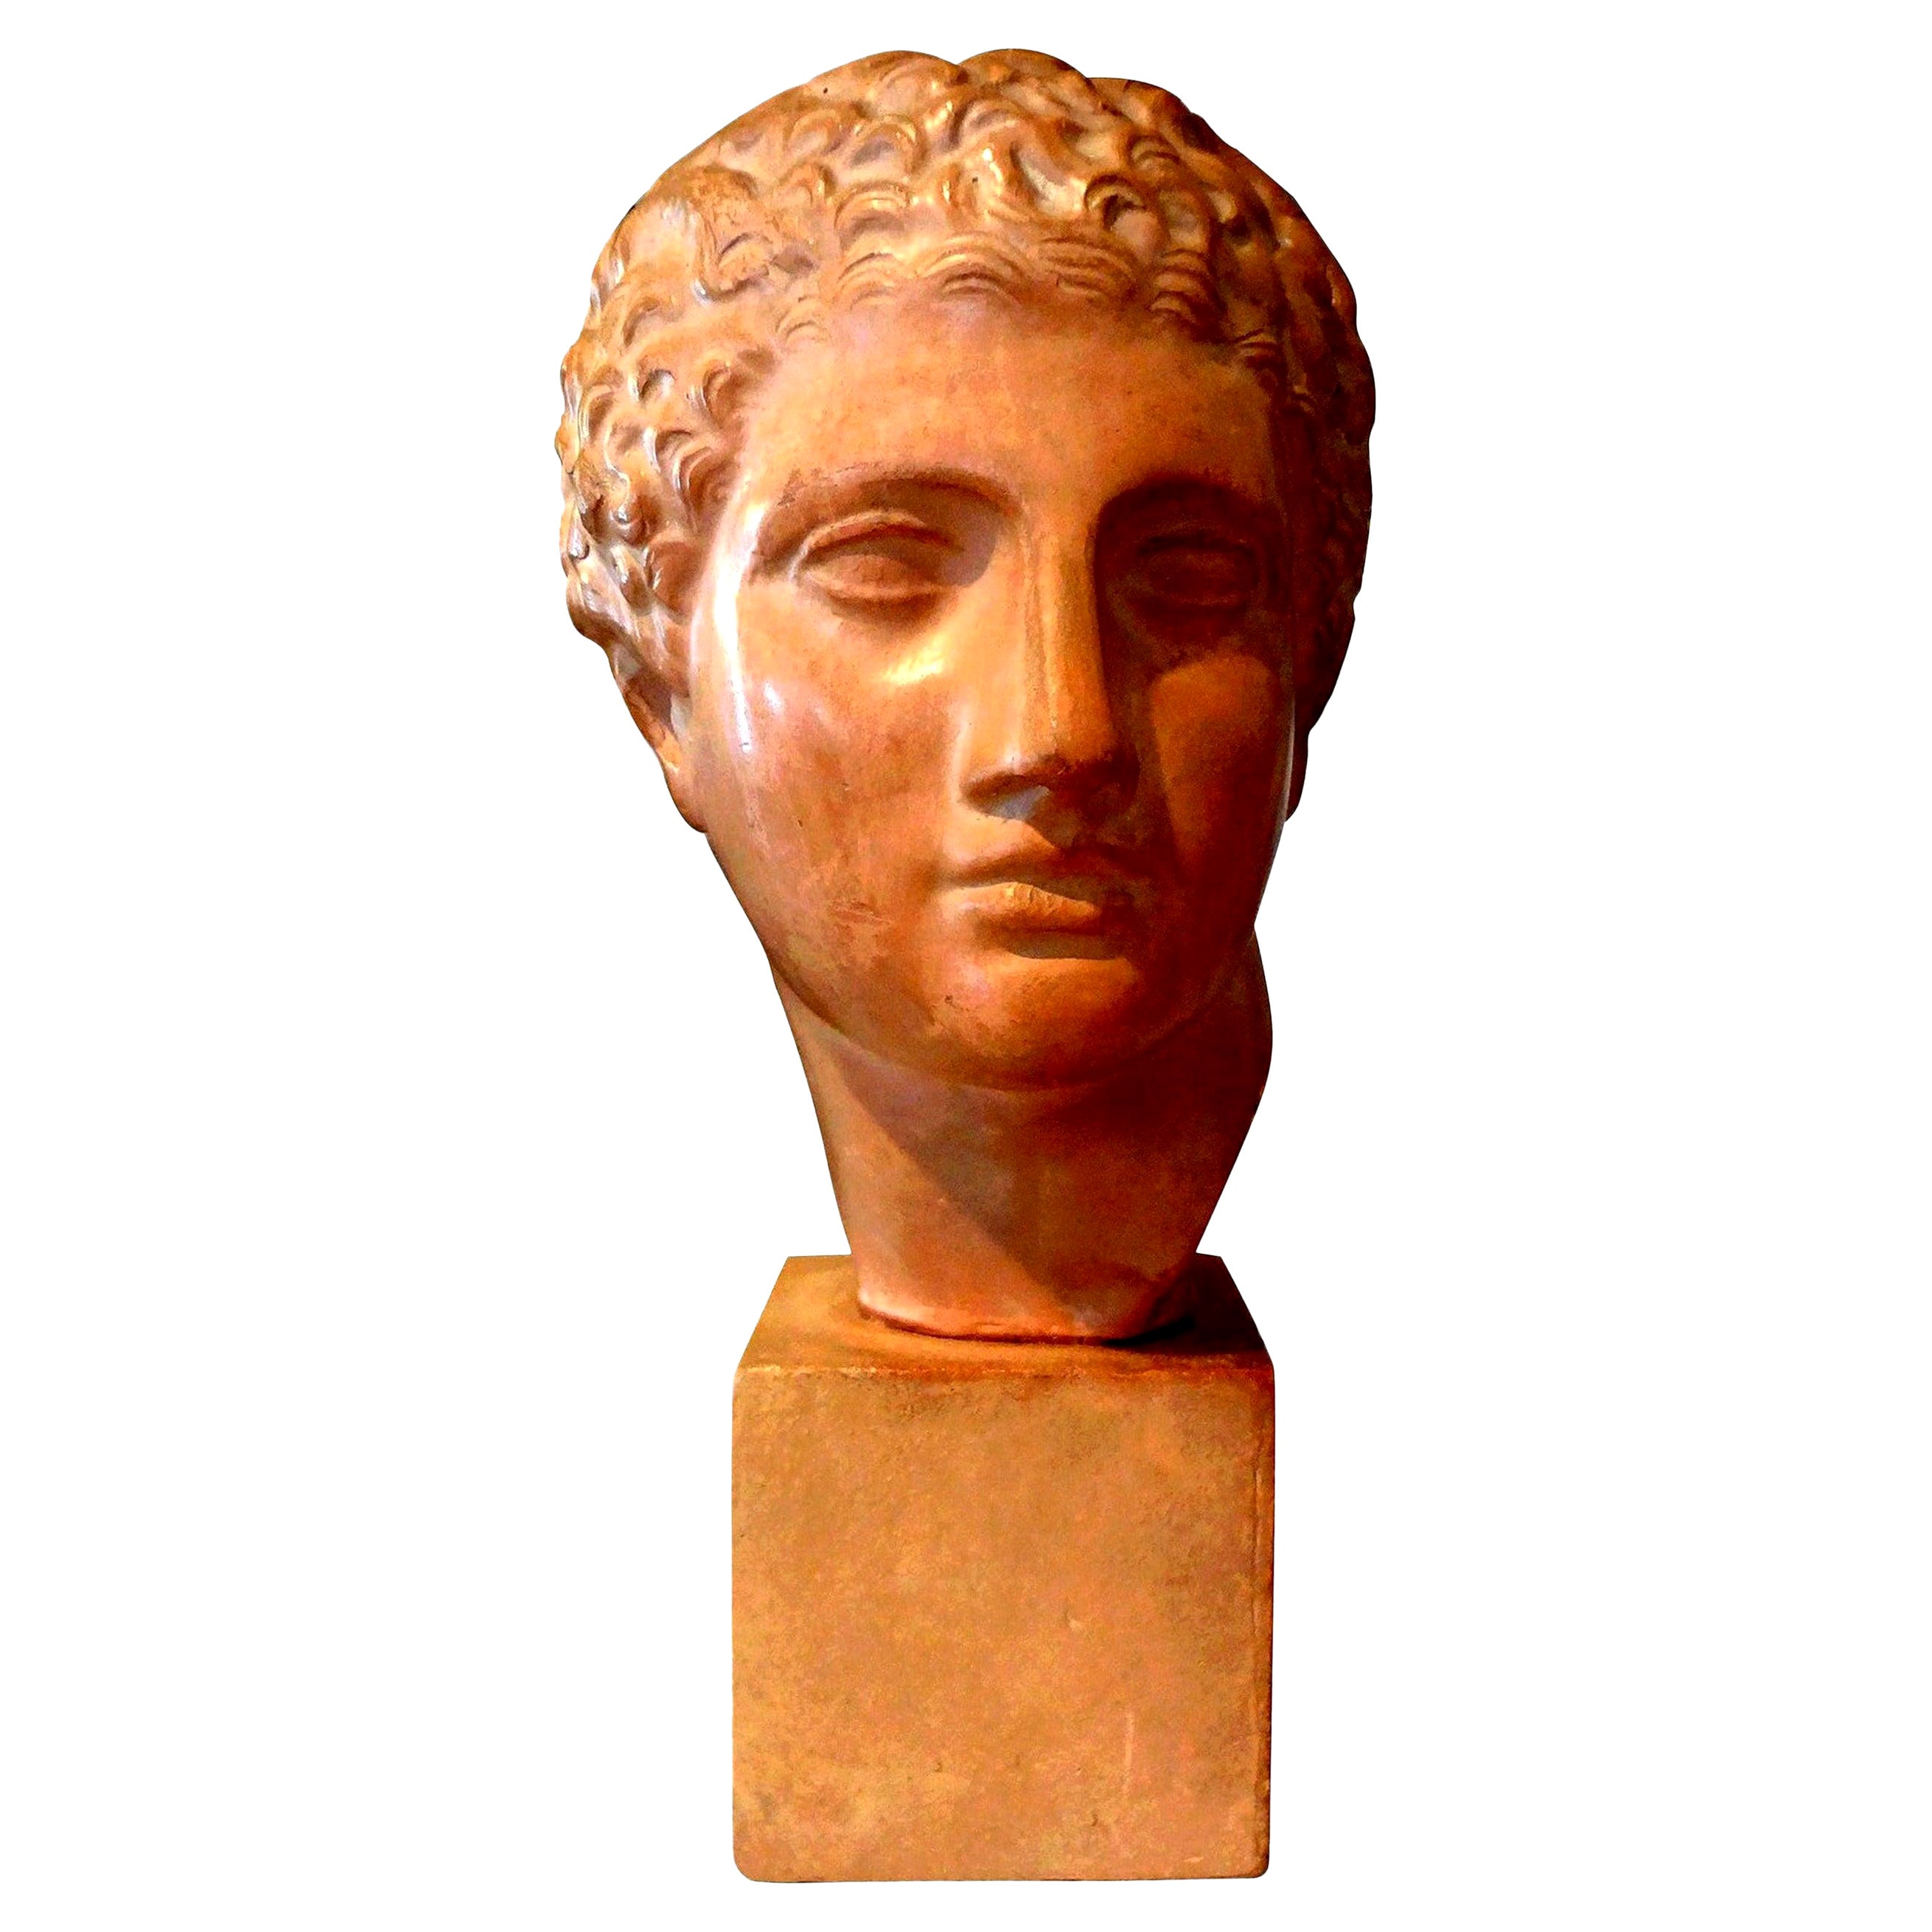 French Terracotta Bust Sculpture of a Classical Roman Male